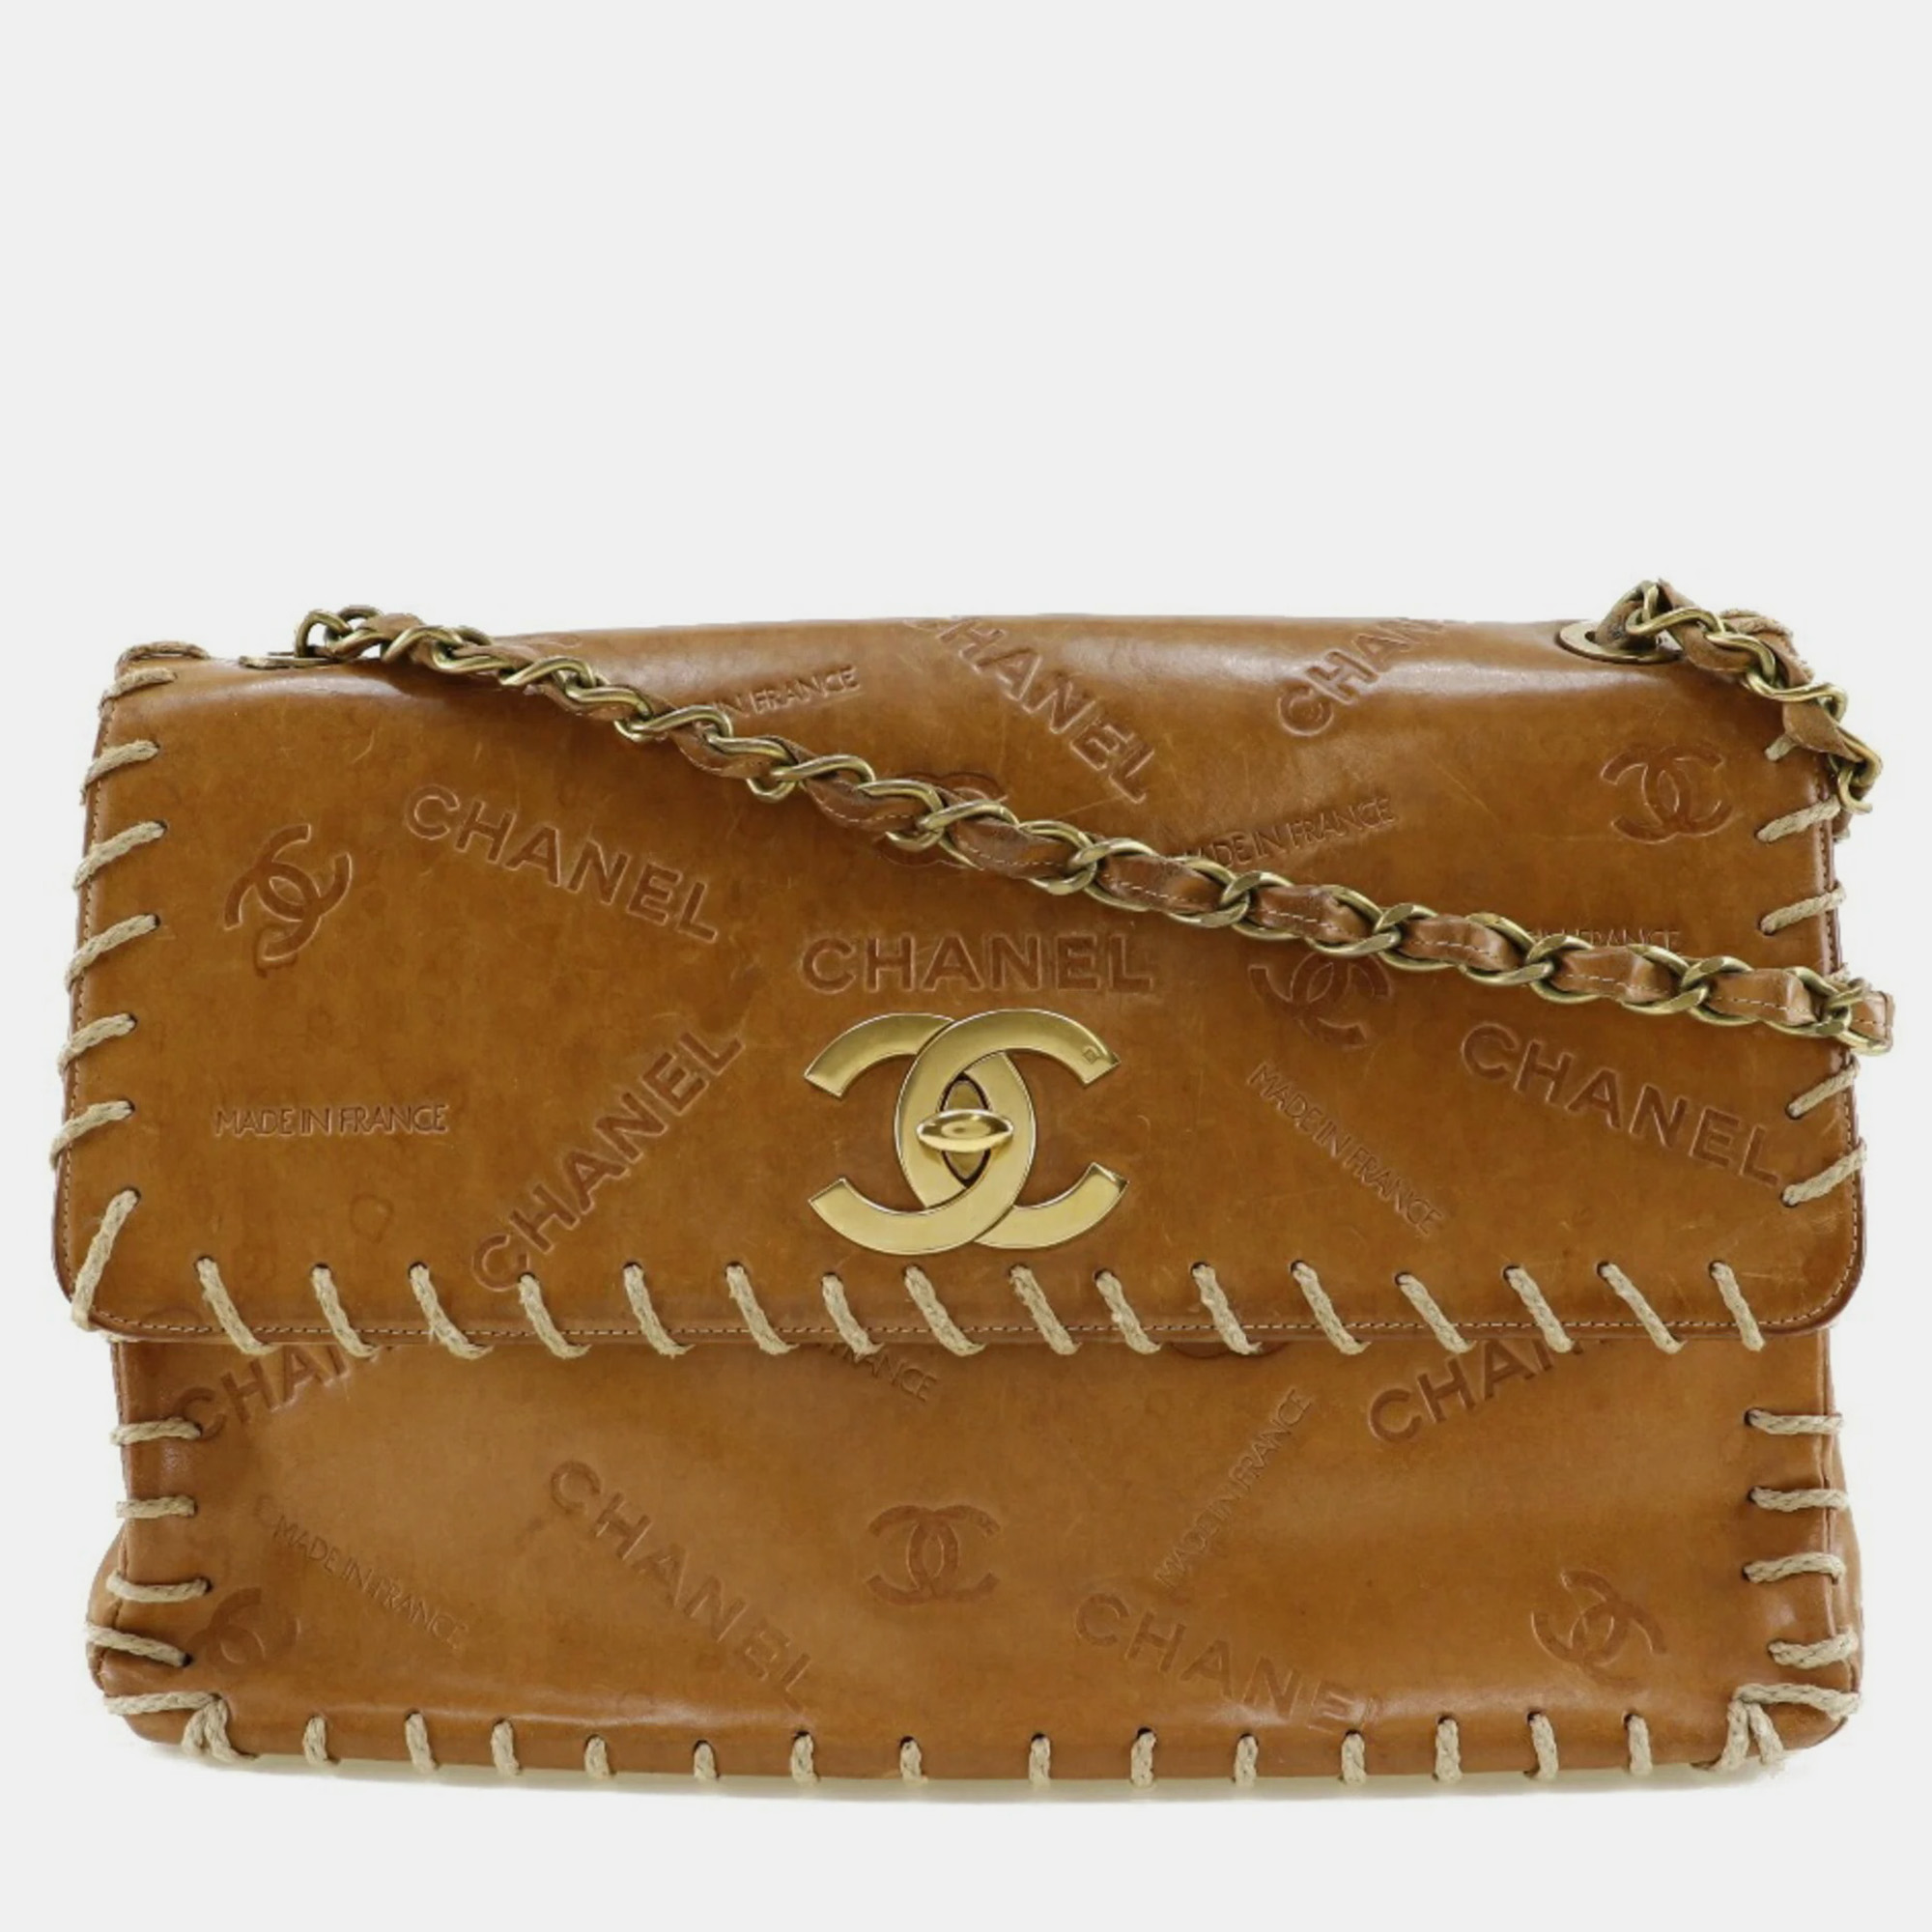 Chanel coco mark logo vintage tanned leather brown/gold chain shoulder bag